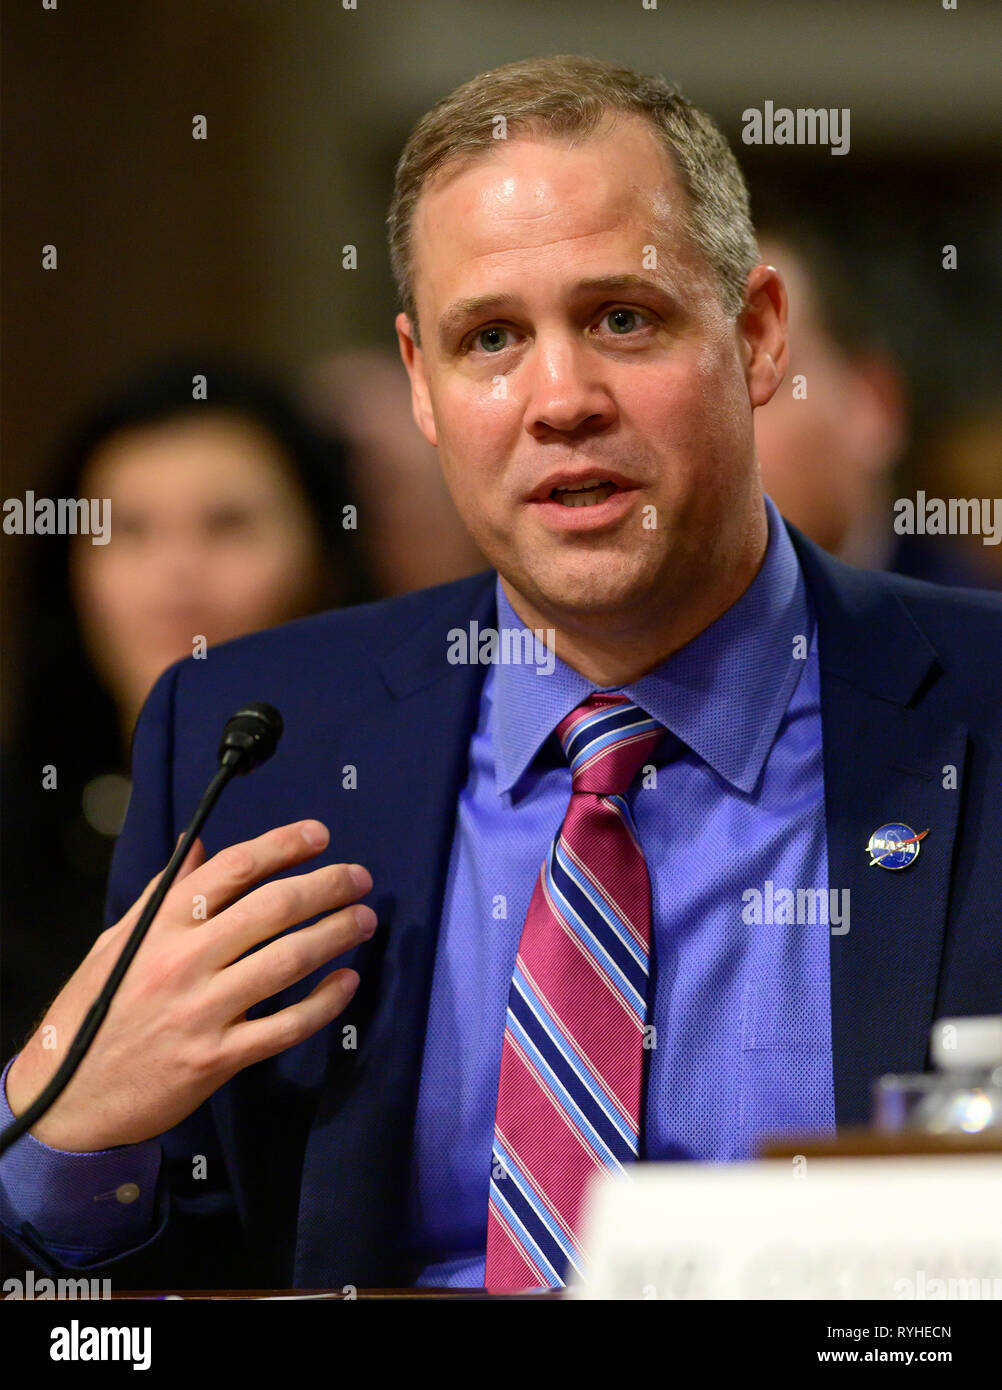 Jim Bridenstine, Administrator, National Aeronautics and Space Administration, testifies before the United States Senate Committee on Commerce, Science, and Transportation on 'The New Space Race: Ensuring U.S. Global Leadership on the Final Frontier' on Capitol Hill in Washington, DC on Wednesday, March 13, 2019. Credit: Ron Sachs/CNP /MediaPunch Stock Photo